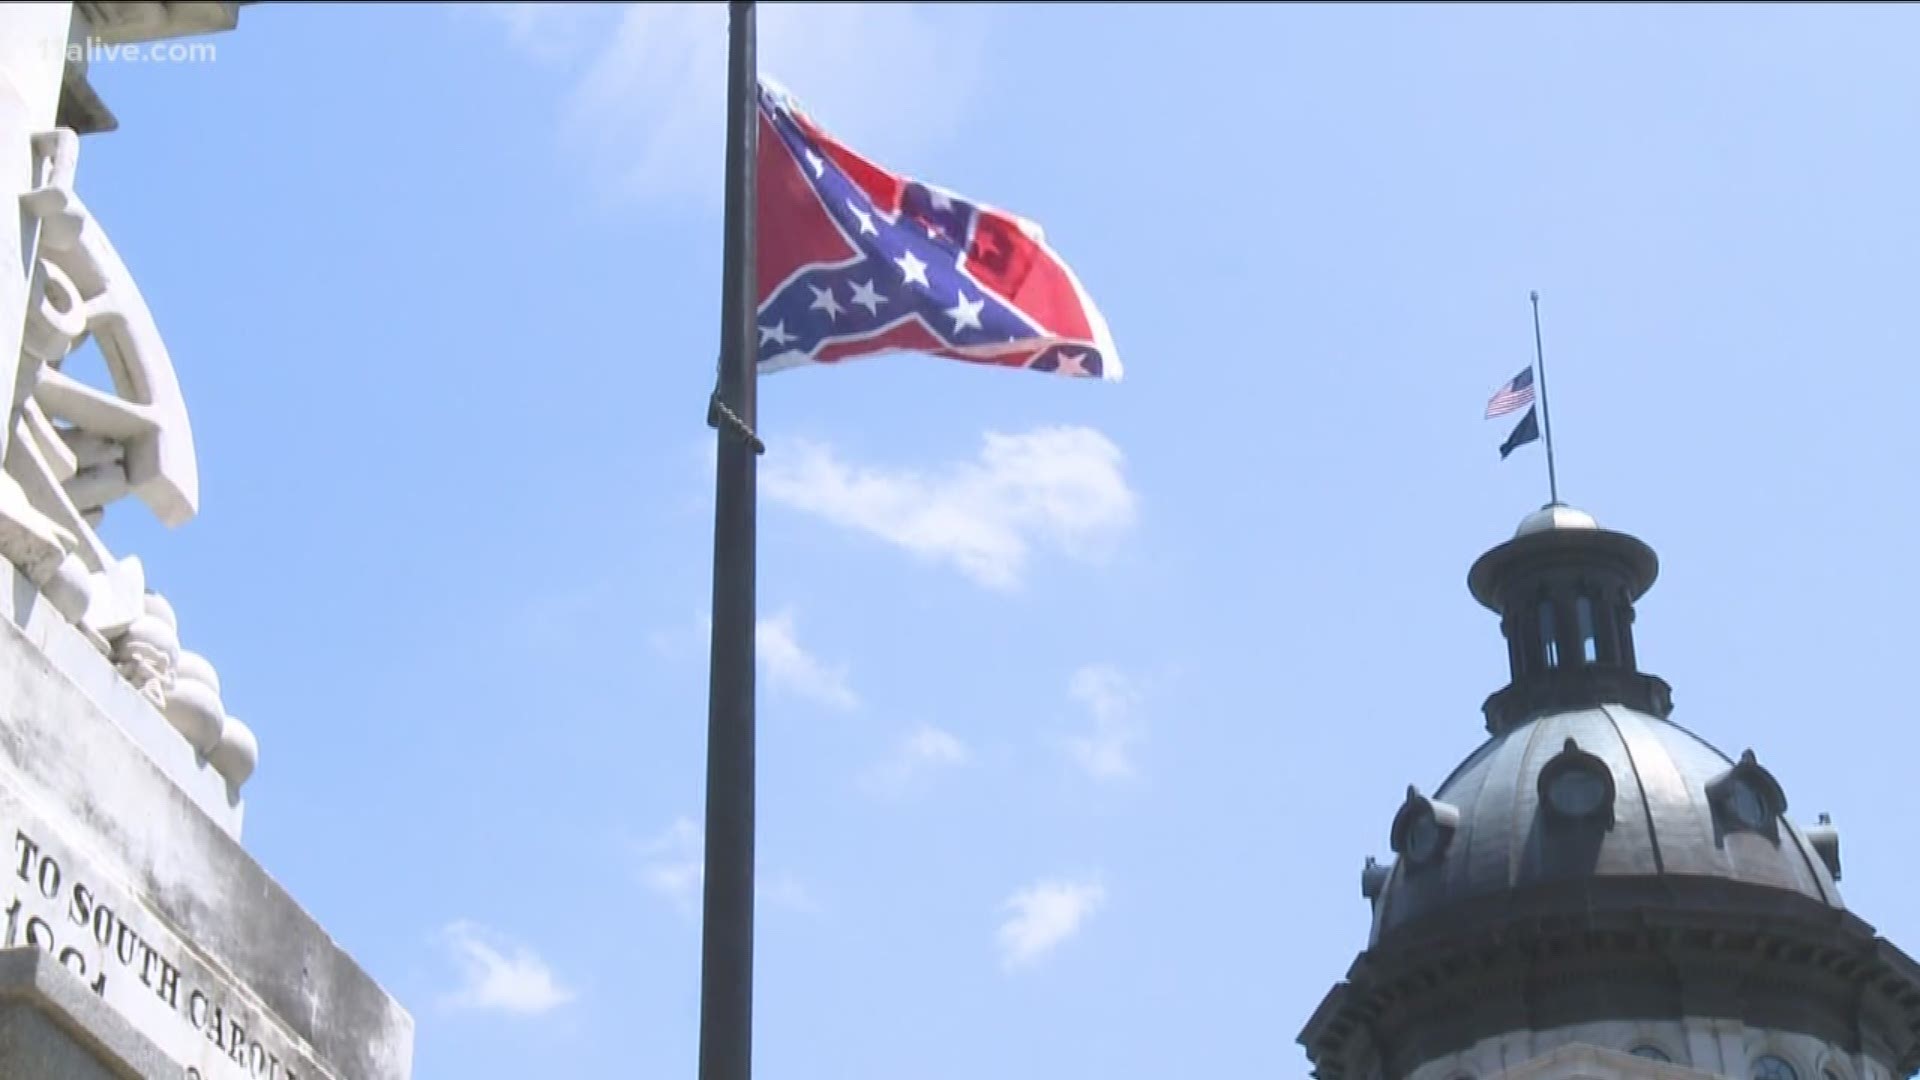 In response to a bill that would outlaw confederate symbols comes a new bill to protect them - and fine anyone who defaces them.